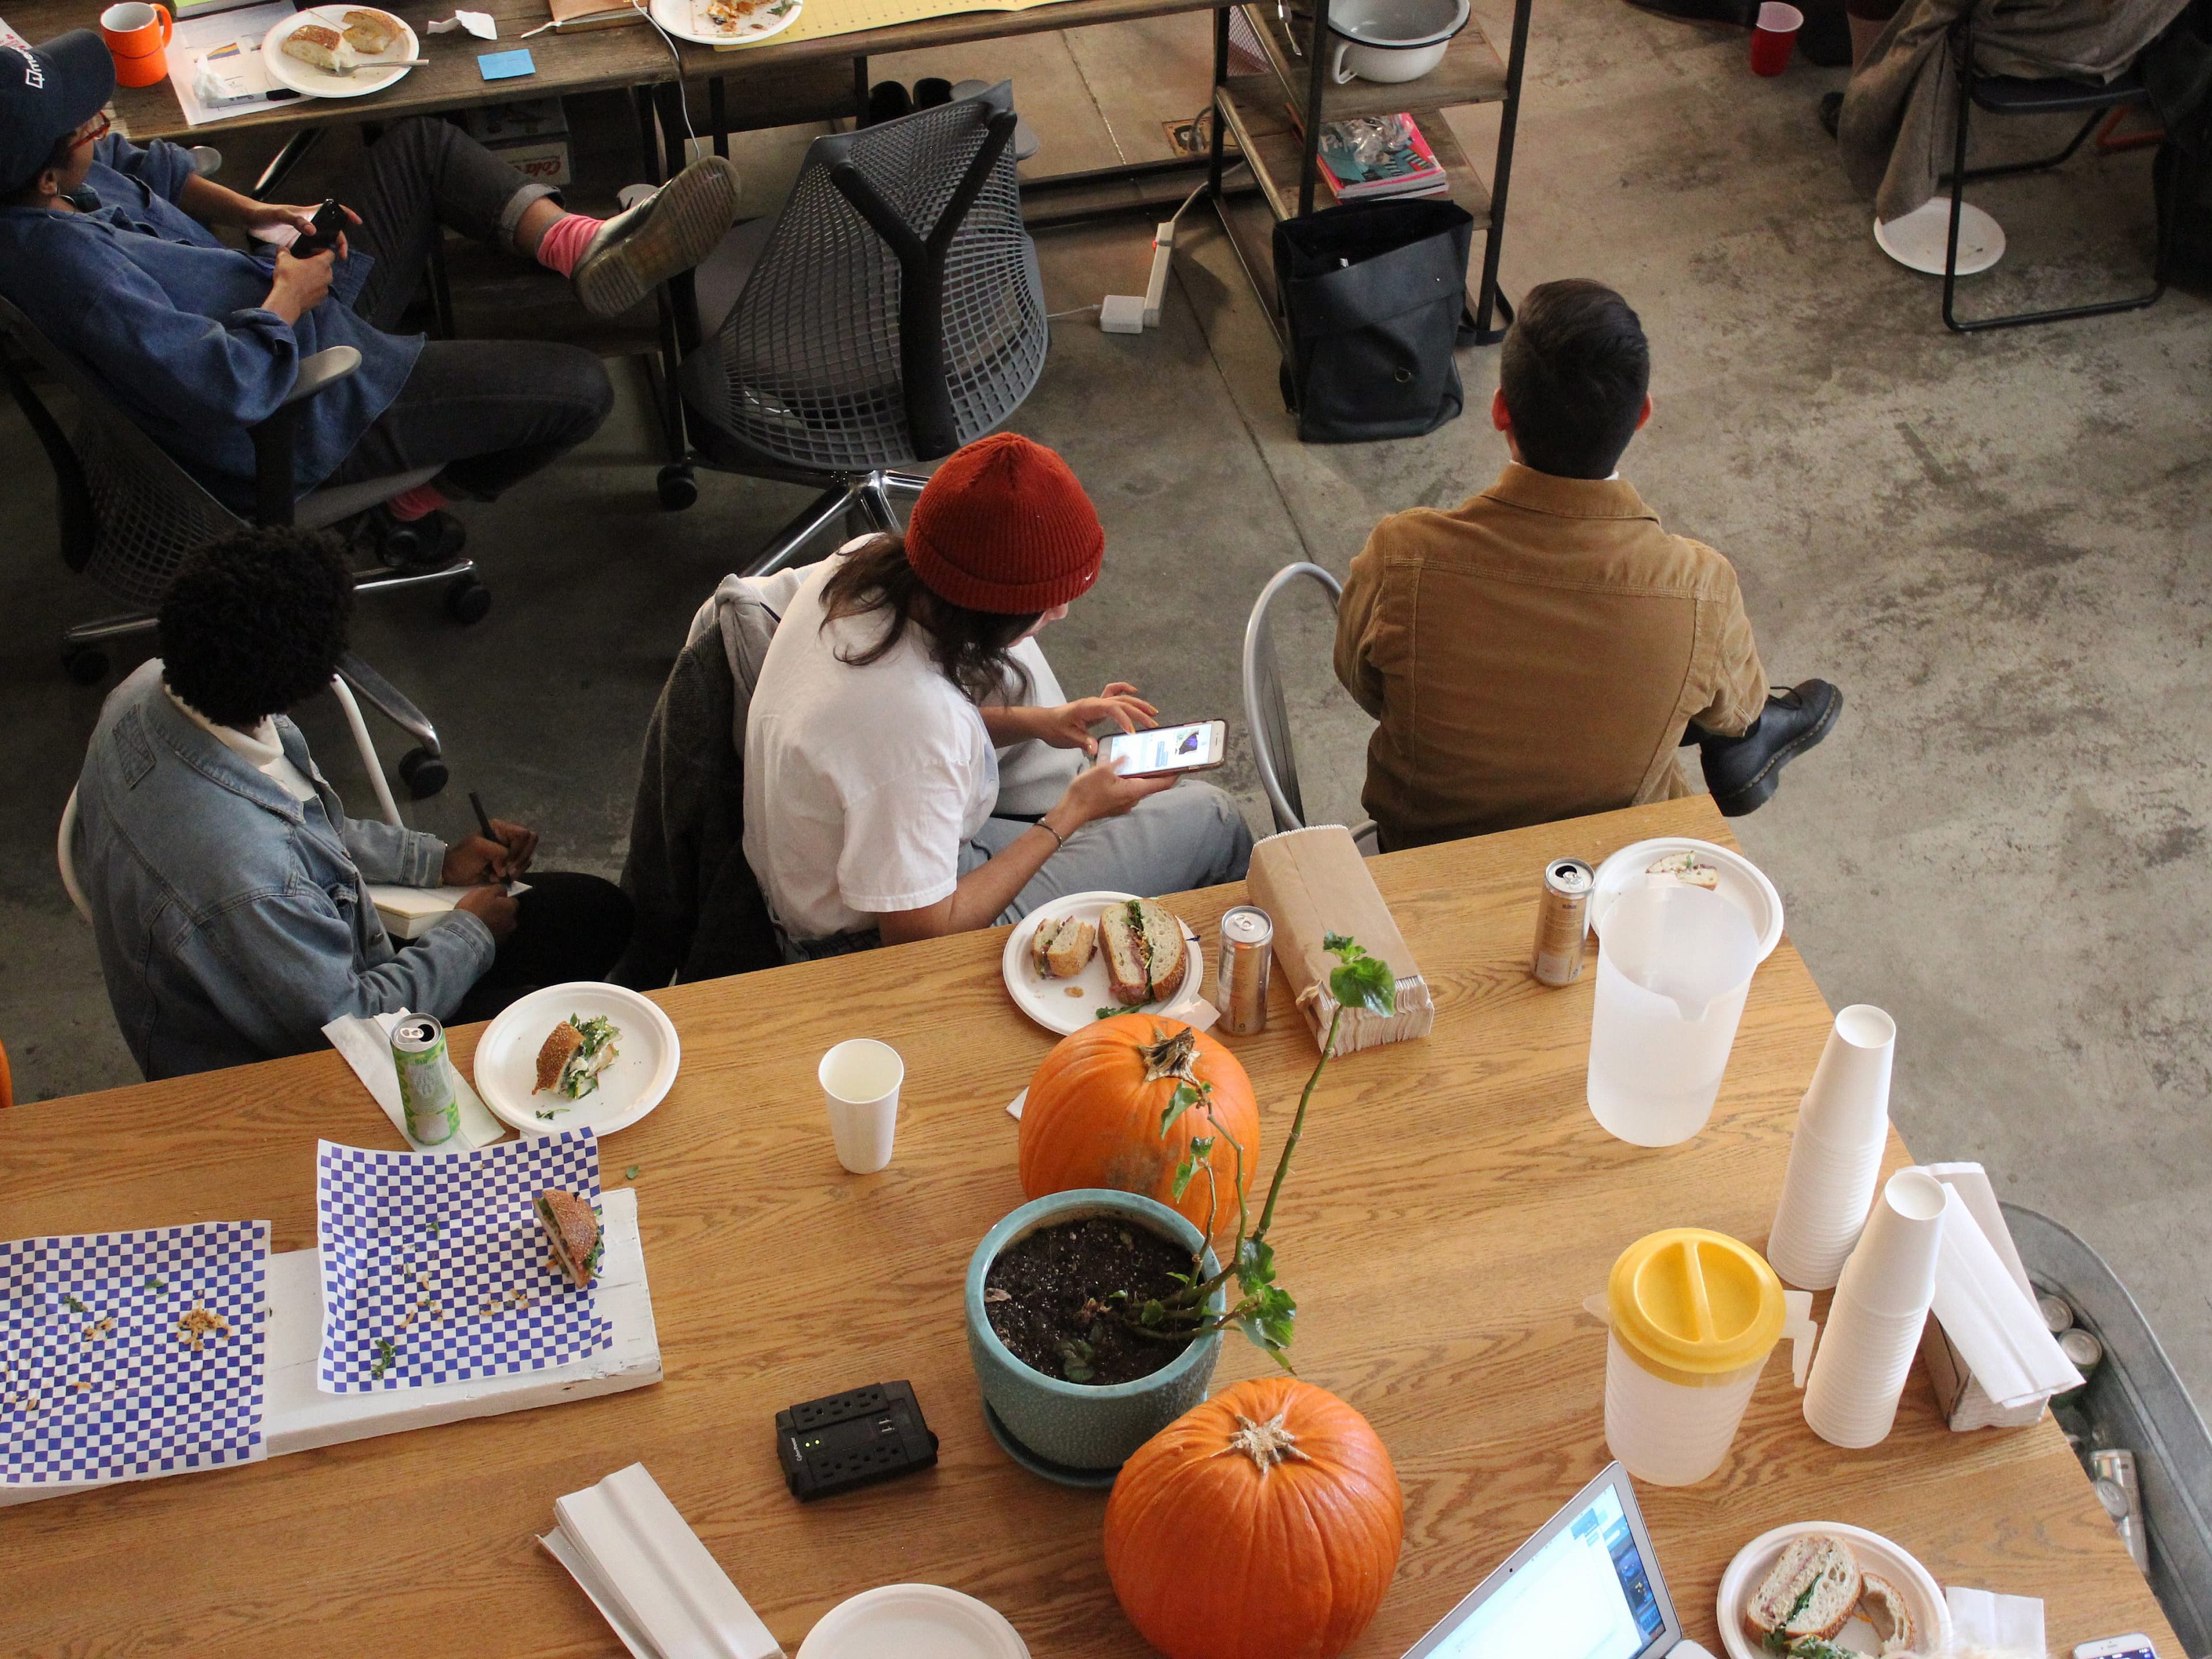 A group of people are seated at a wooden table with pumpkins, food, and drinks, engaging in various activities. Some are using their phones, while others are conversing or eating. The area has a casual, communal atmosphere with plates of food and beverages.